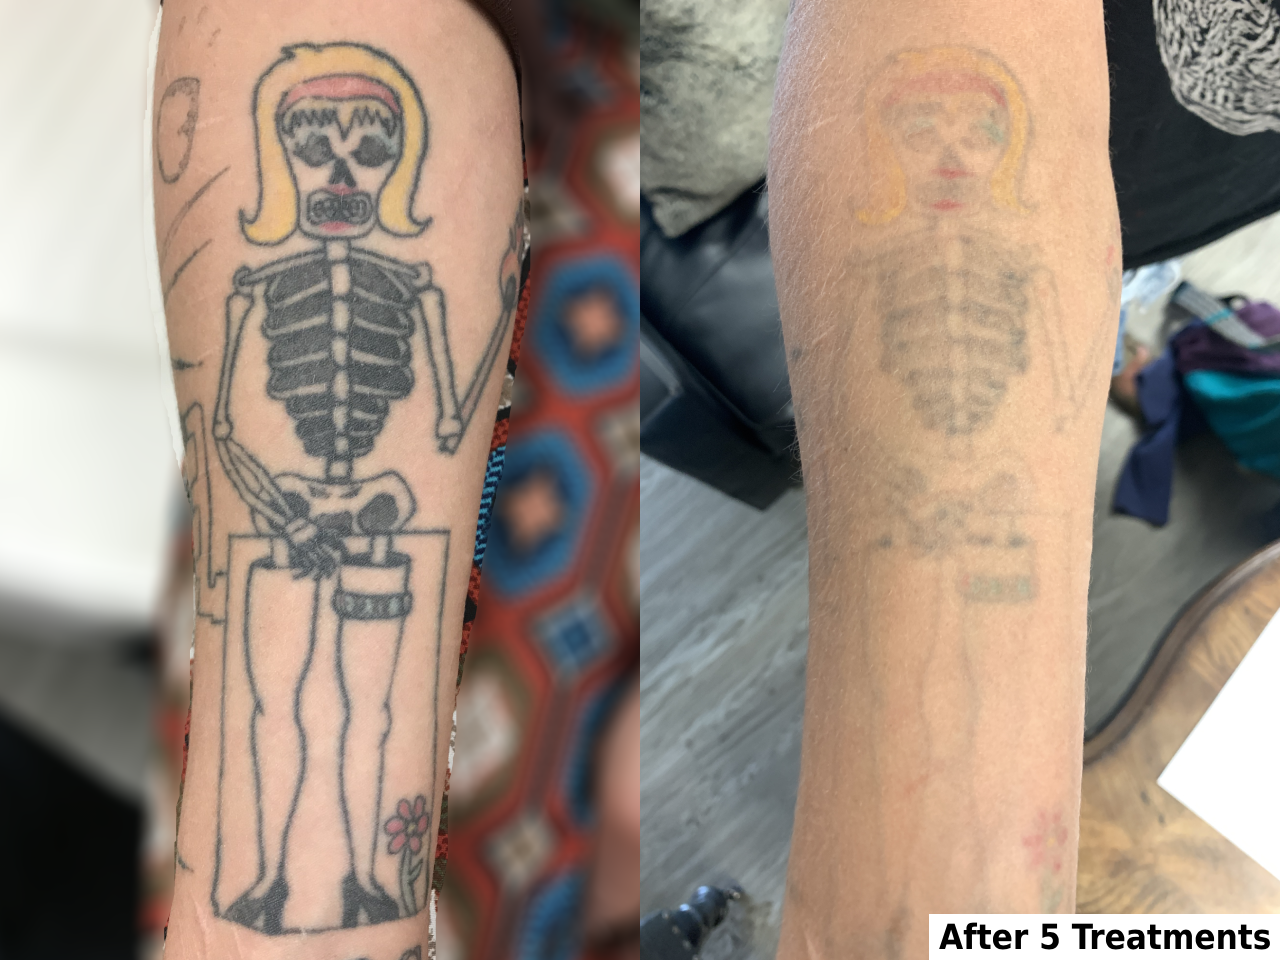 Tattoo Removal Before and After in Colorado, how tattoo removal works